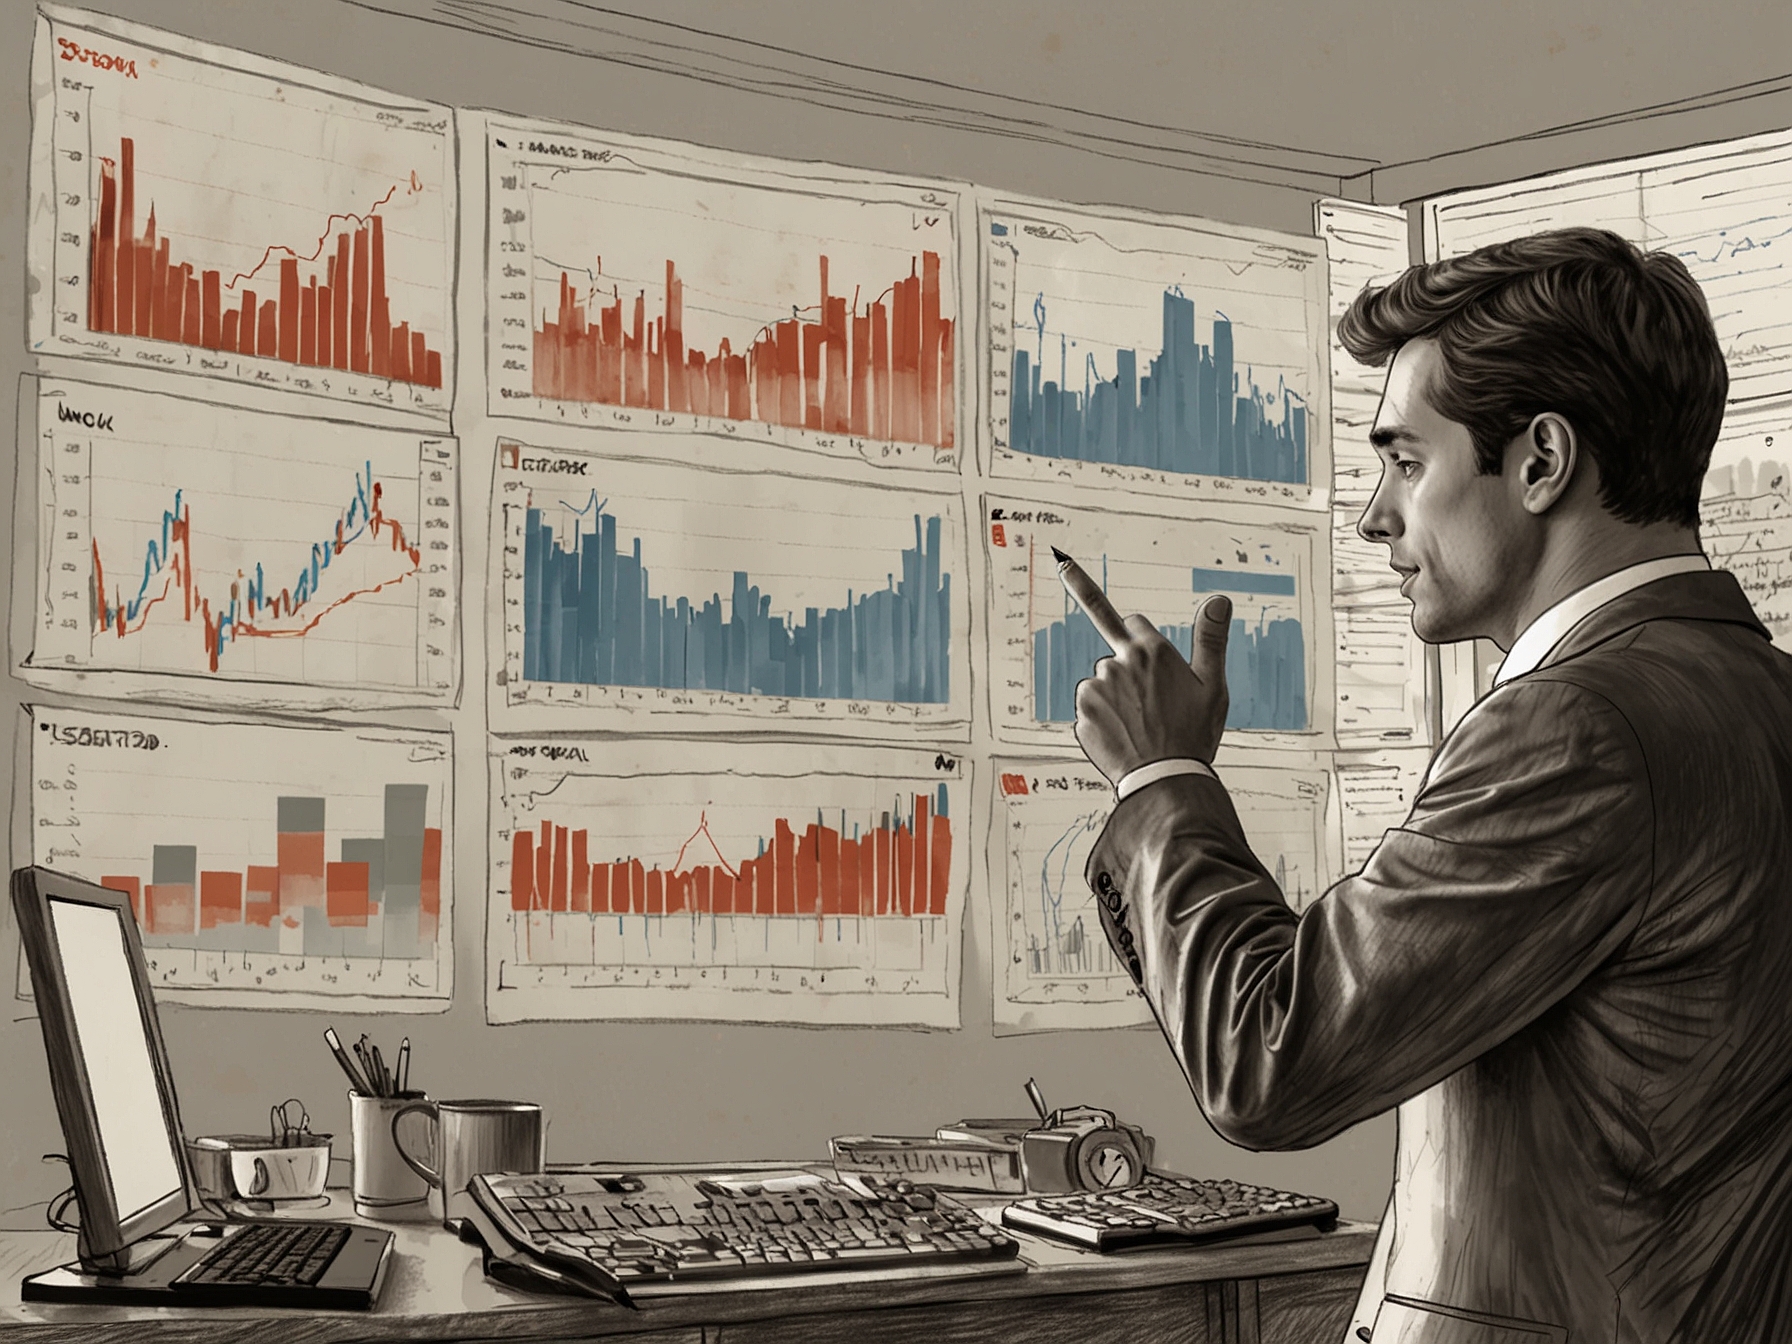 A graphic depicting investors analyzing financial charts and market trends, emphasizing the importance of understanding the price band, GMP, and historical financial performance before investing in the ABD IPO.